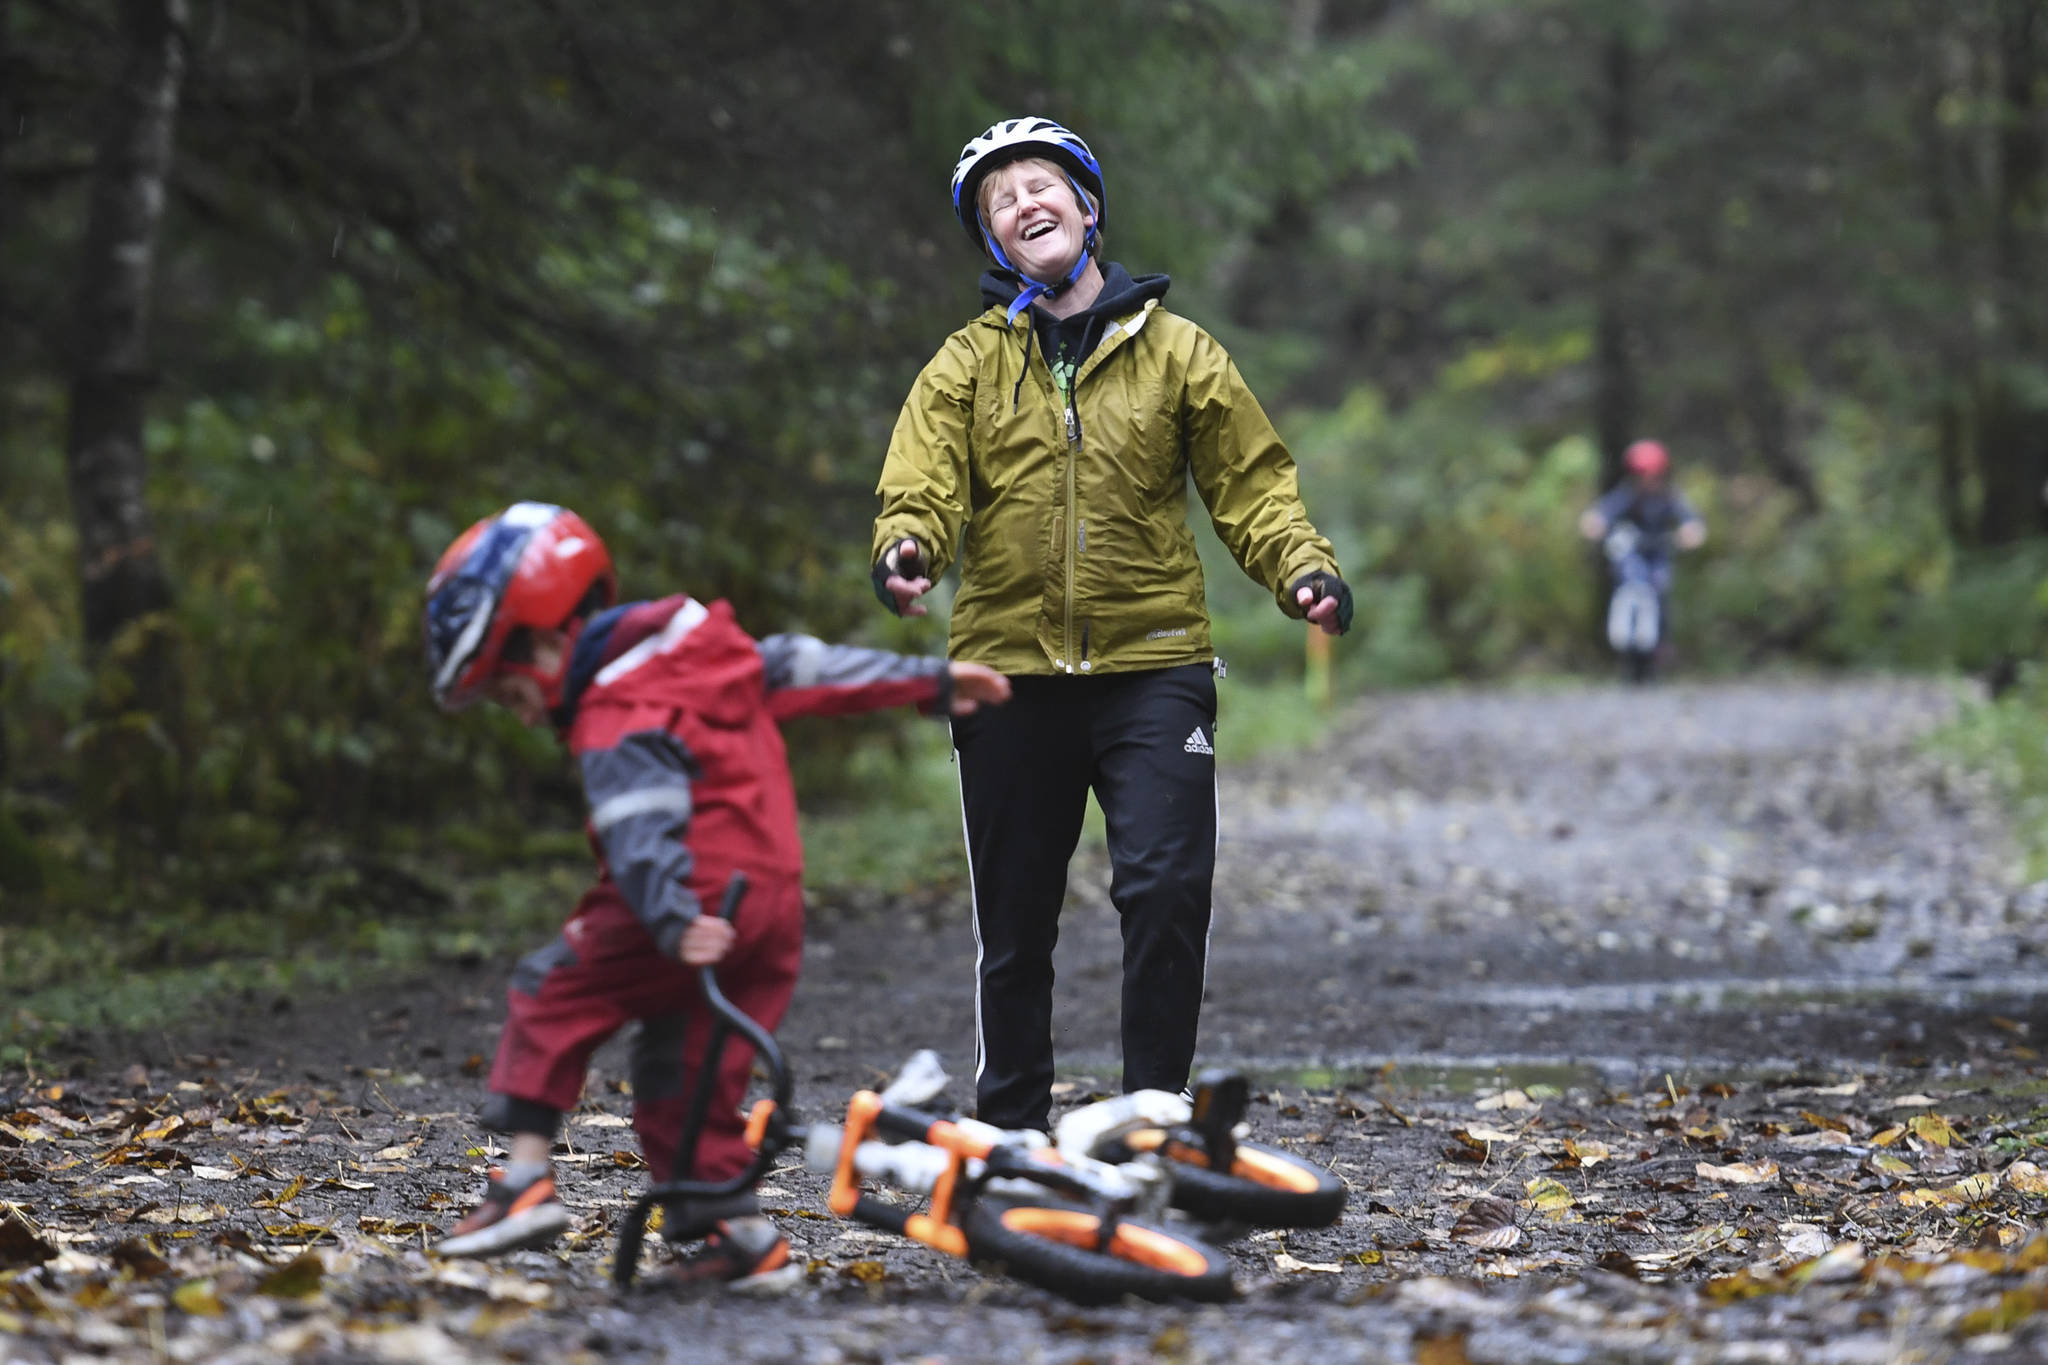 Joanna Quigg laughs as Joshua, 4, falls off his bike during the Douglas Dirt Derby Youth Bike Race at Savikko Park and the Treadwell Historic Trail on Saturday, Oct. 5, 2019. The event was organized by the Juneau Freewheelers Bicycle Club. (Michael Penn | Juneau Empire)